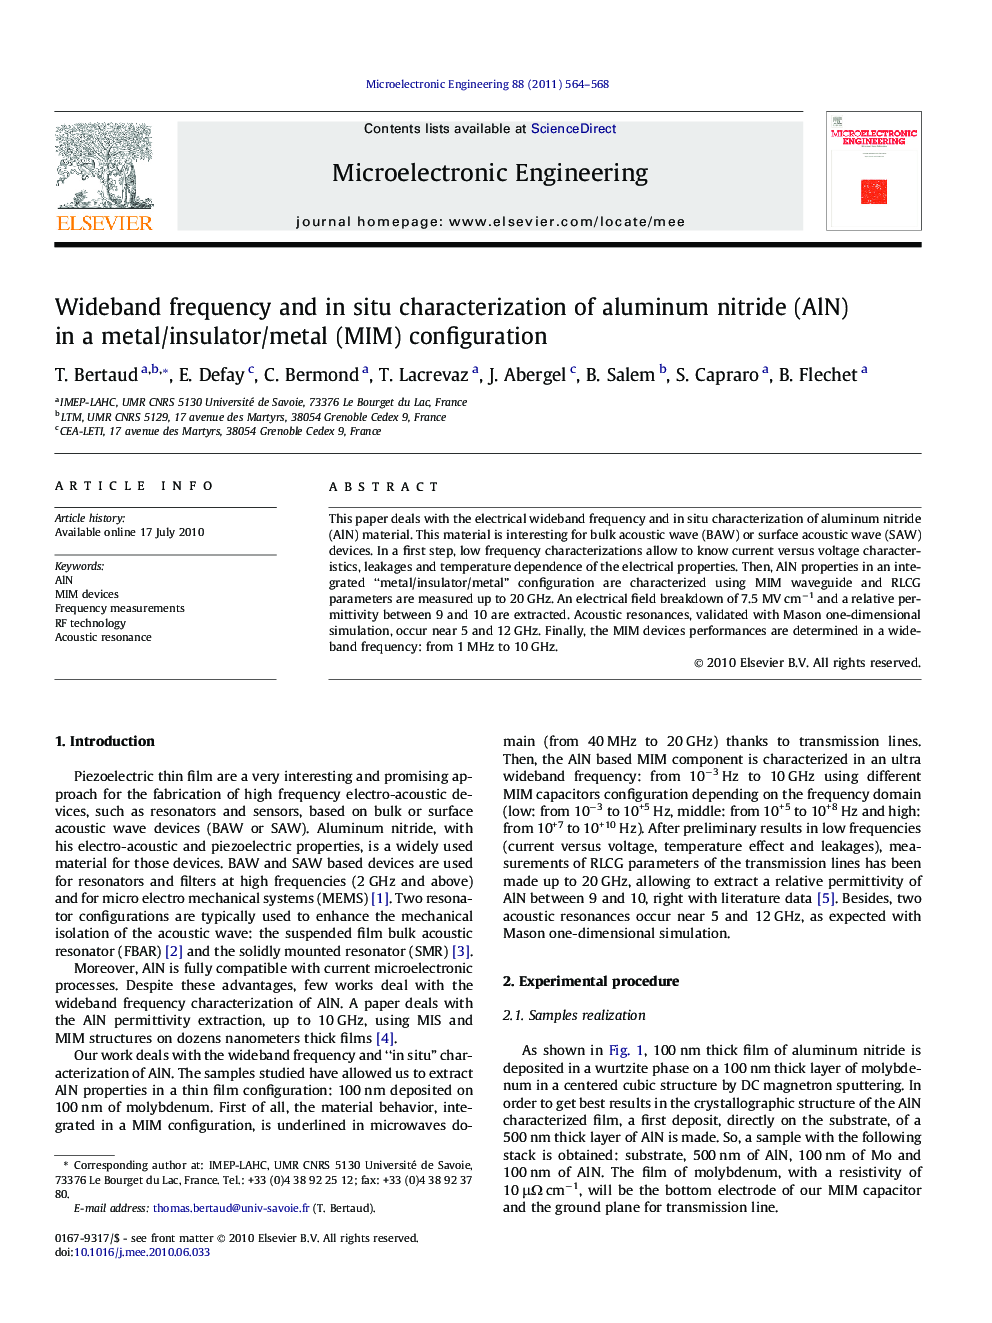 Wideband frequency and in situ characterization of aluminum nitride (AlN) in a metal/insulator/metal (MIM) configuration